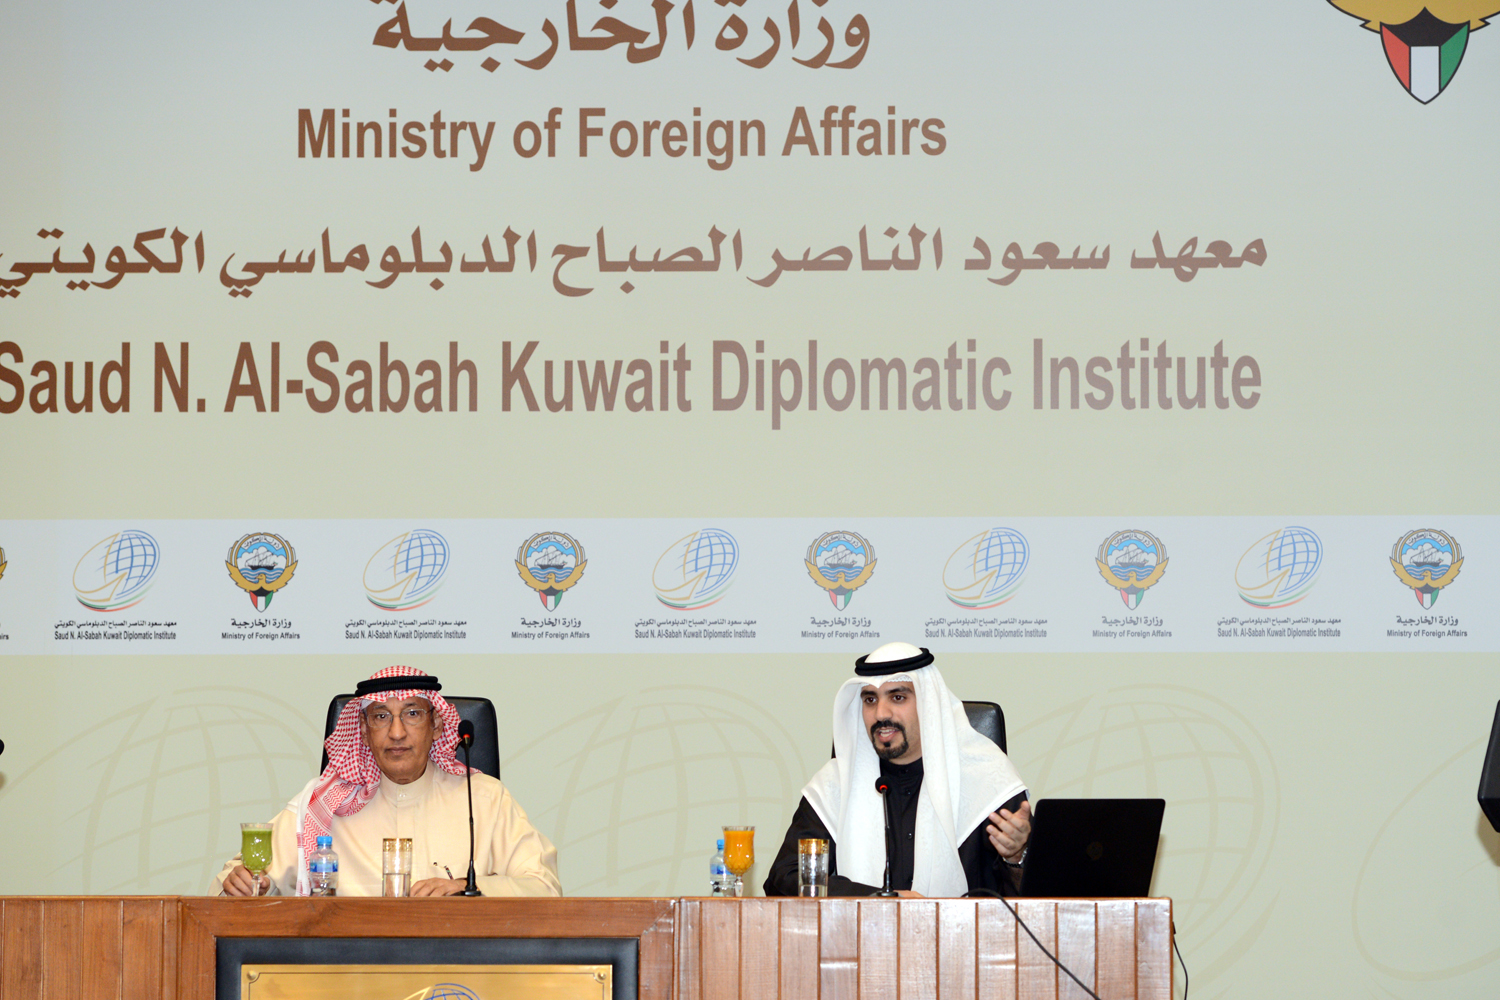 seminar organized by the Kuwait Diplomatic Institute in collaboration with the Kuwaiti Foreign Ministry's Economic Department on direct investment in Kuwait